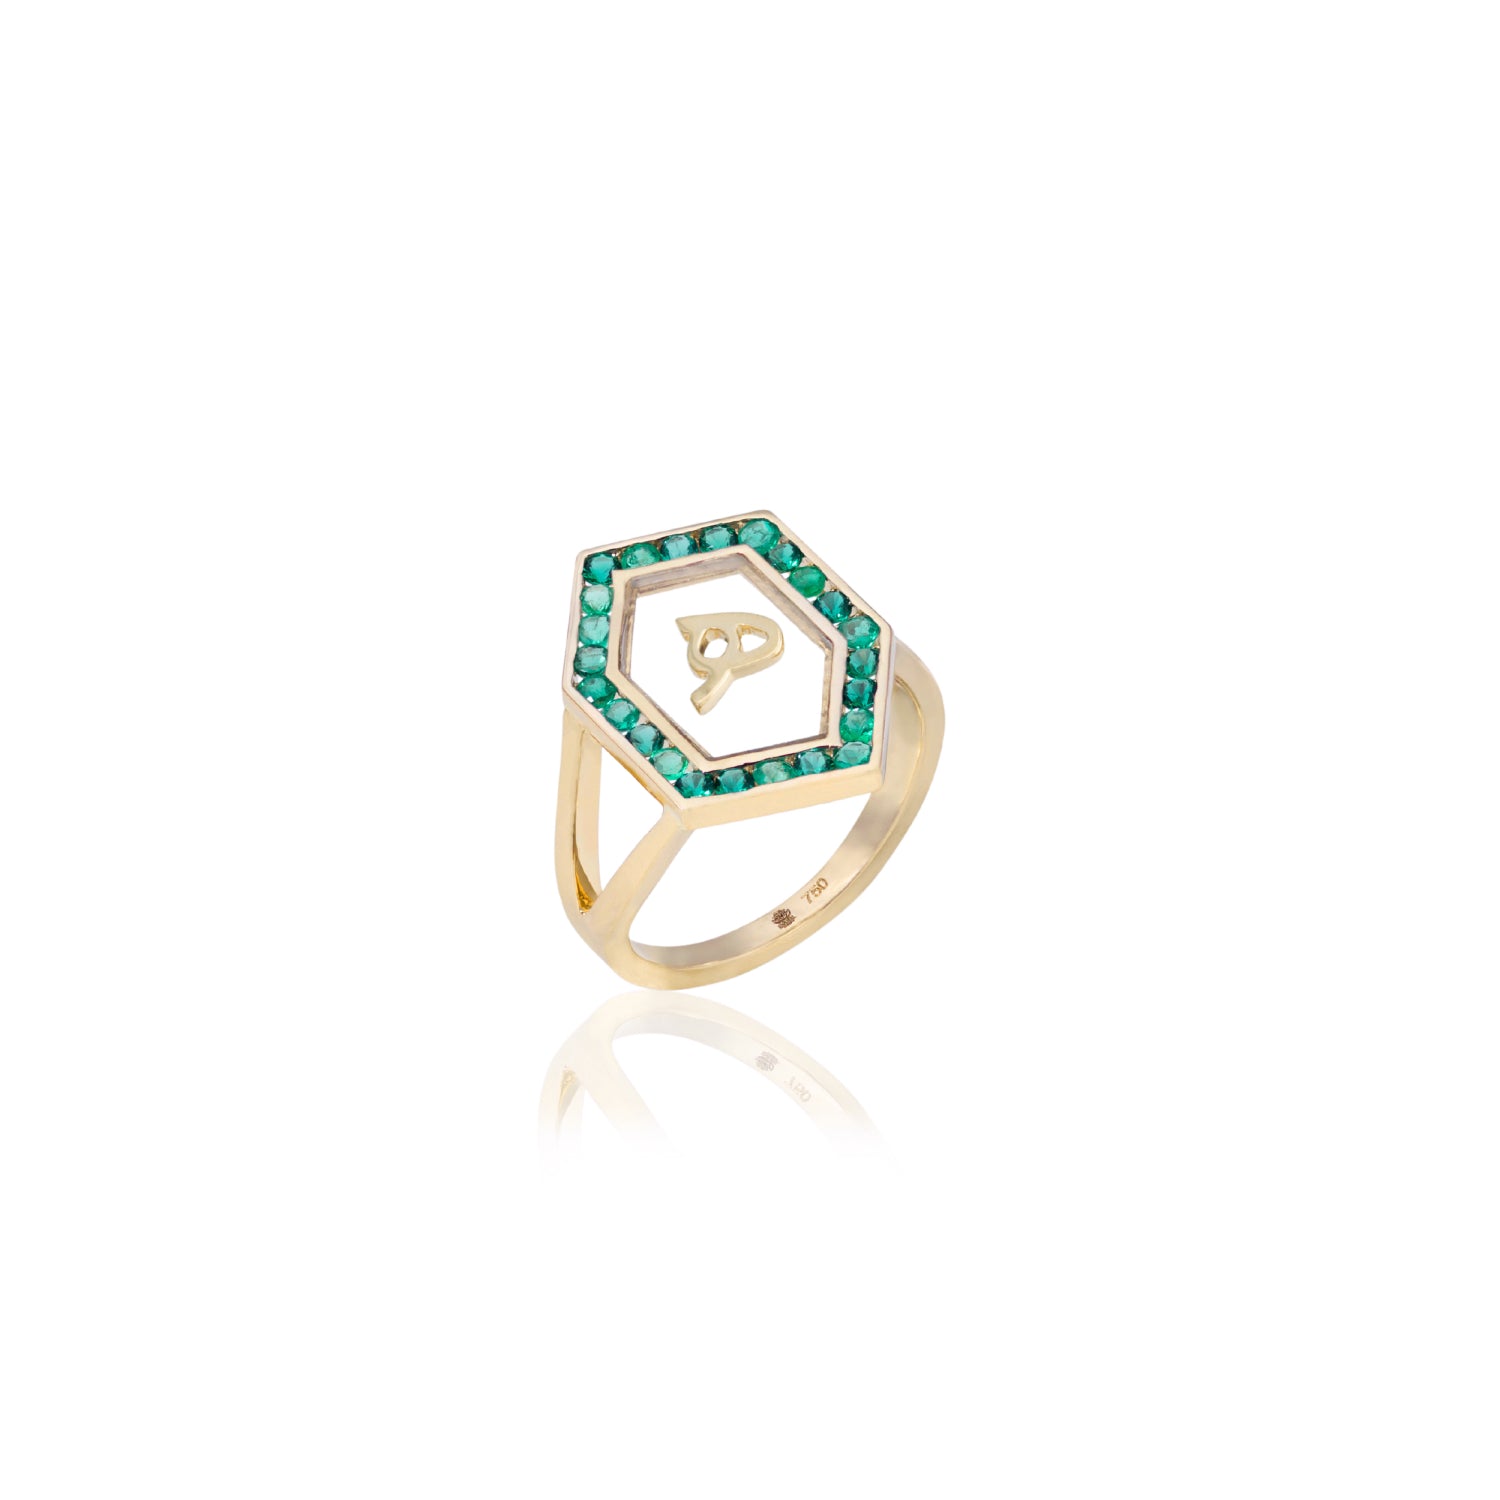 Qamoos 1.0 Letter هـ Emerald Ring in Yellow Gold